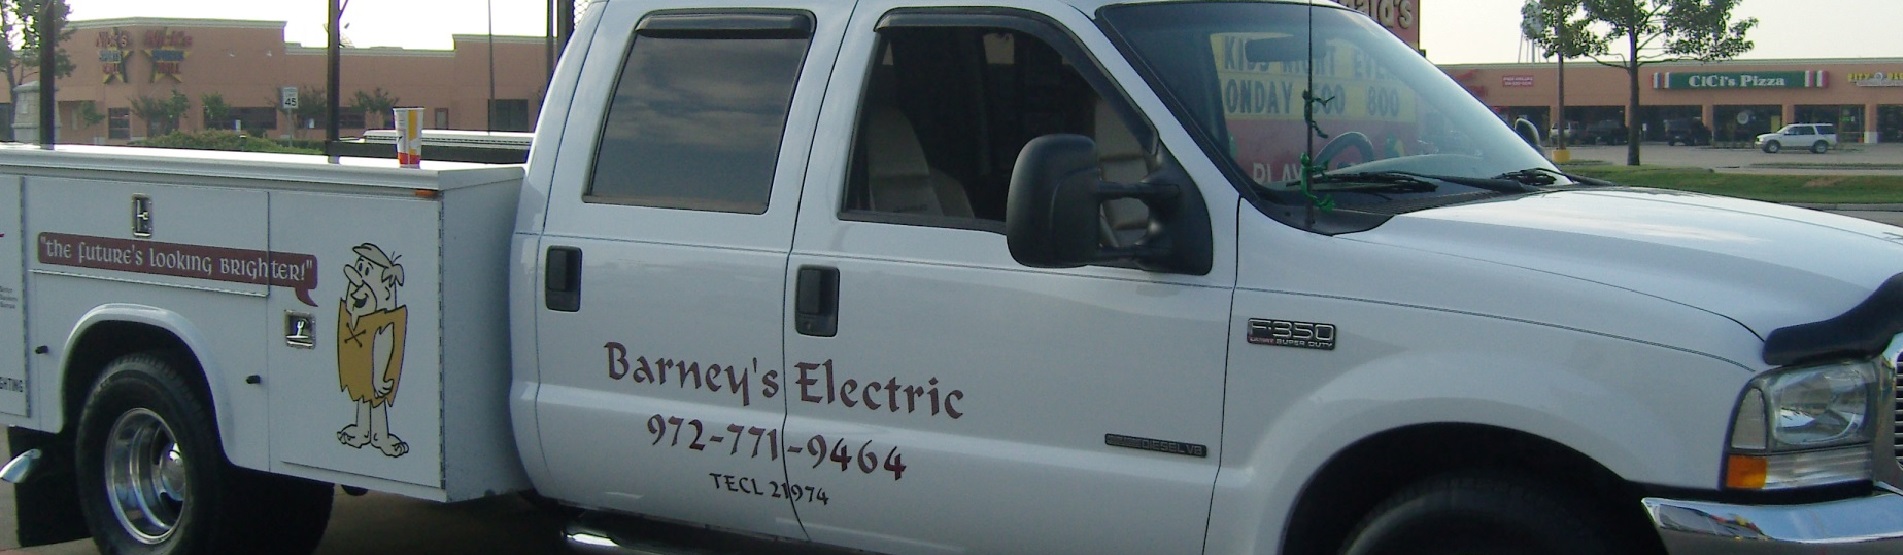 remodel electrician Rowlett texas, remodeling electrician Rowlett texas, electrical remodel Rowlett texas, electrical remodeling Rowlett texas, electrical remodeling contractor Rowlett texas Electrician Rockwall TX Barney's Electric Full Service Electrician Residential Commercial Retail and New Construction Wiring Repair Installation Service 24 Hour Emergency Services Master Electrician Rockwall Texas